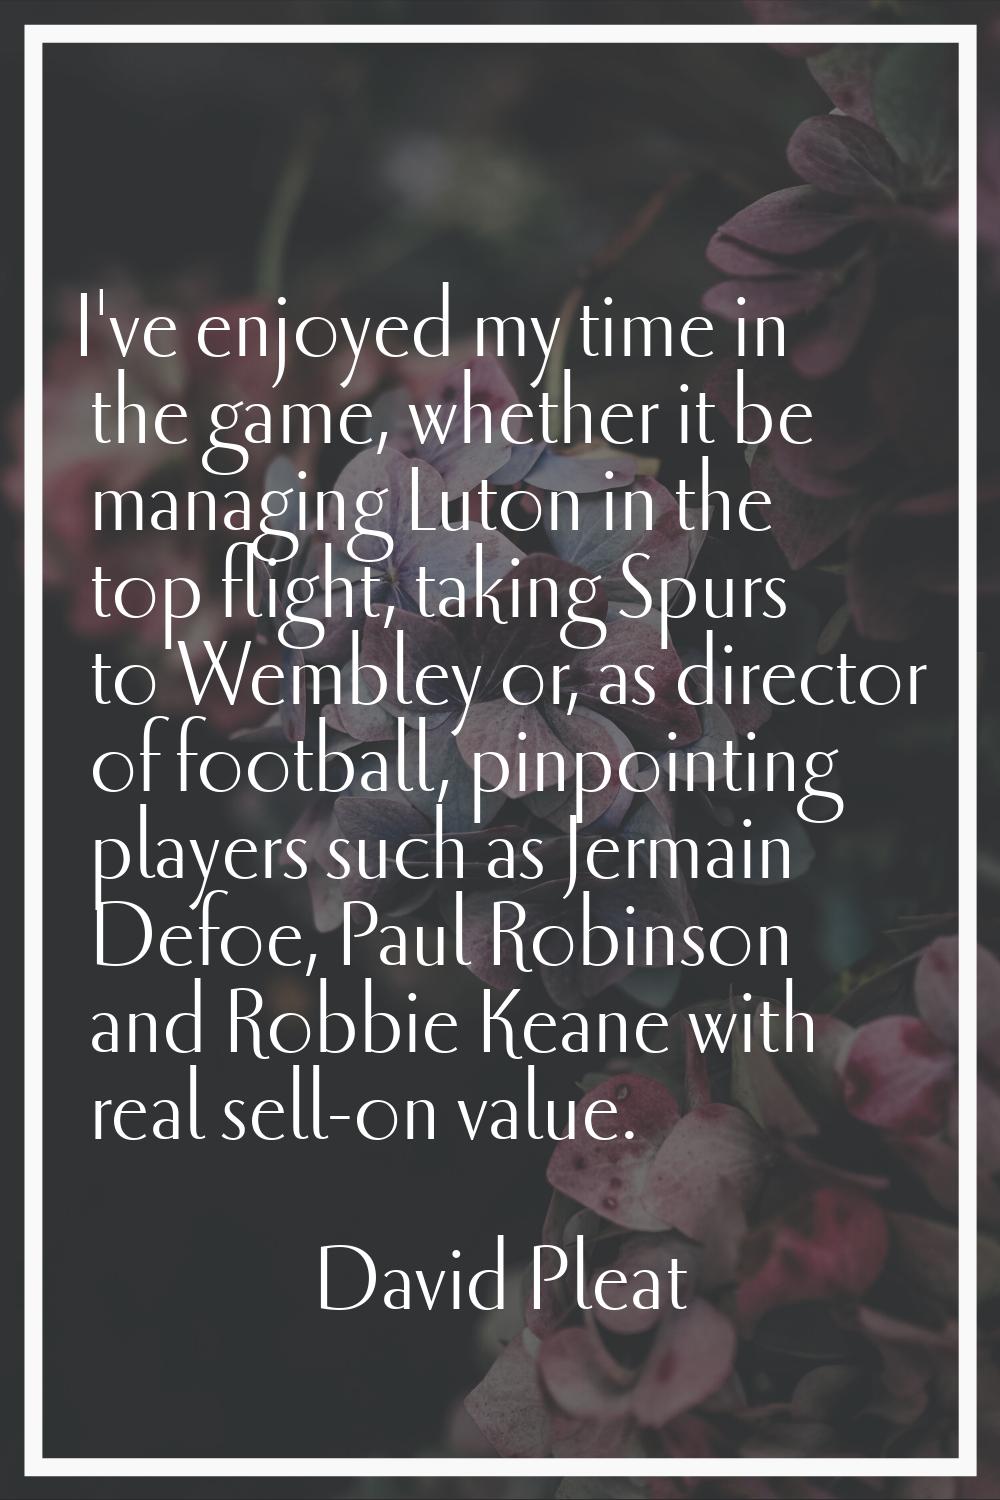 I've enjoyed my time in the game, whether it be managing Luton in the top flight, taking Spurs to W